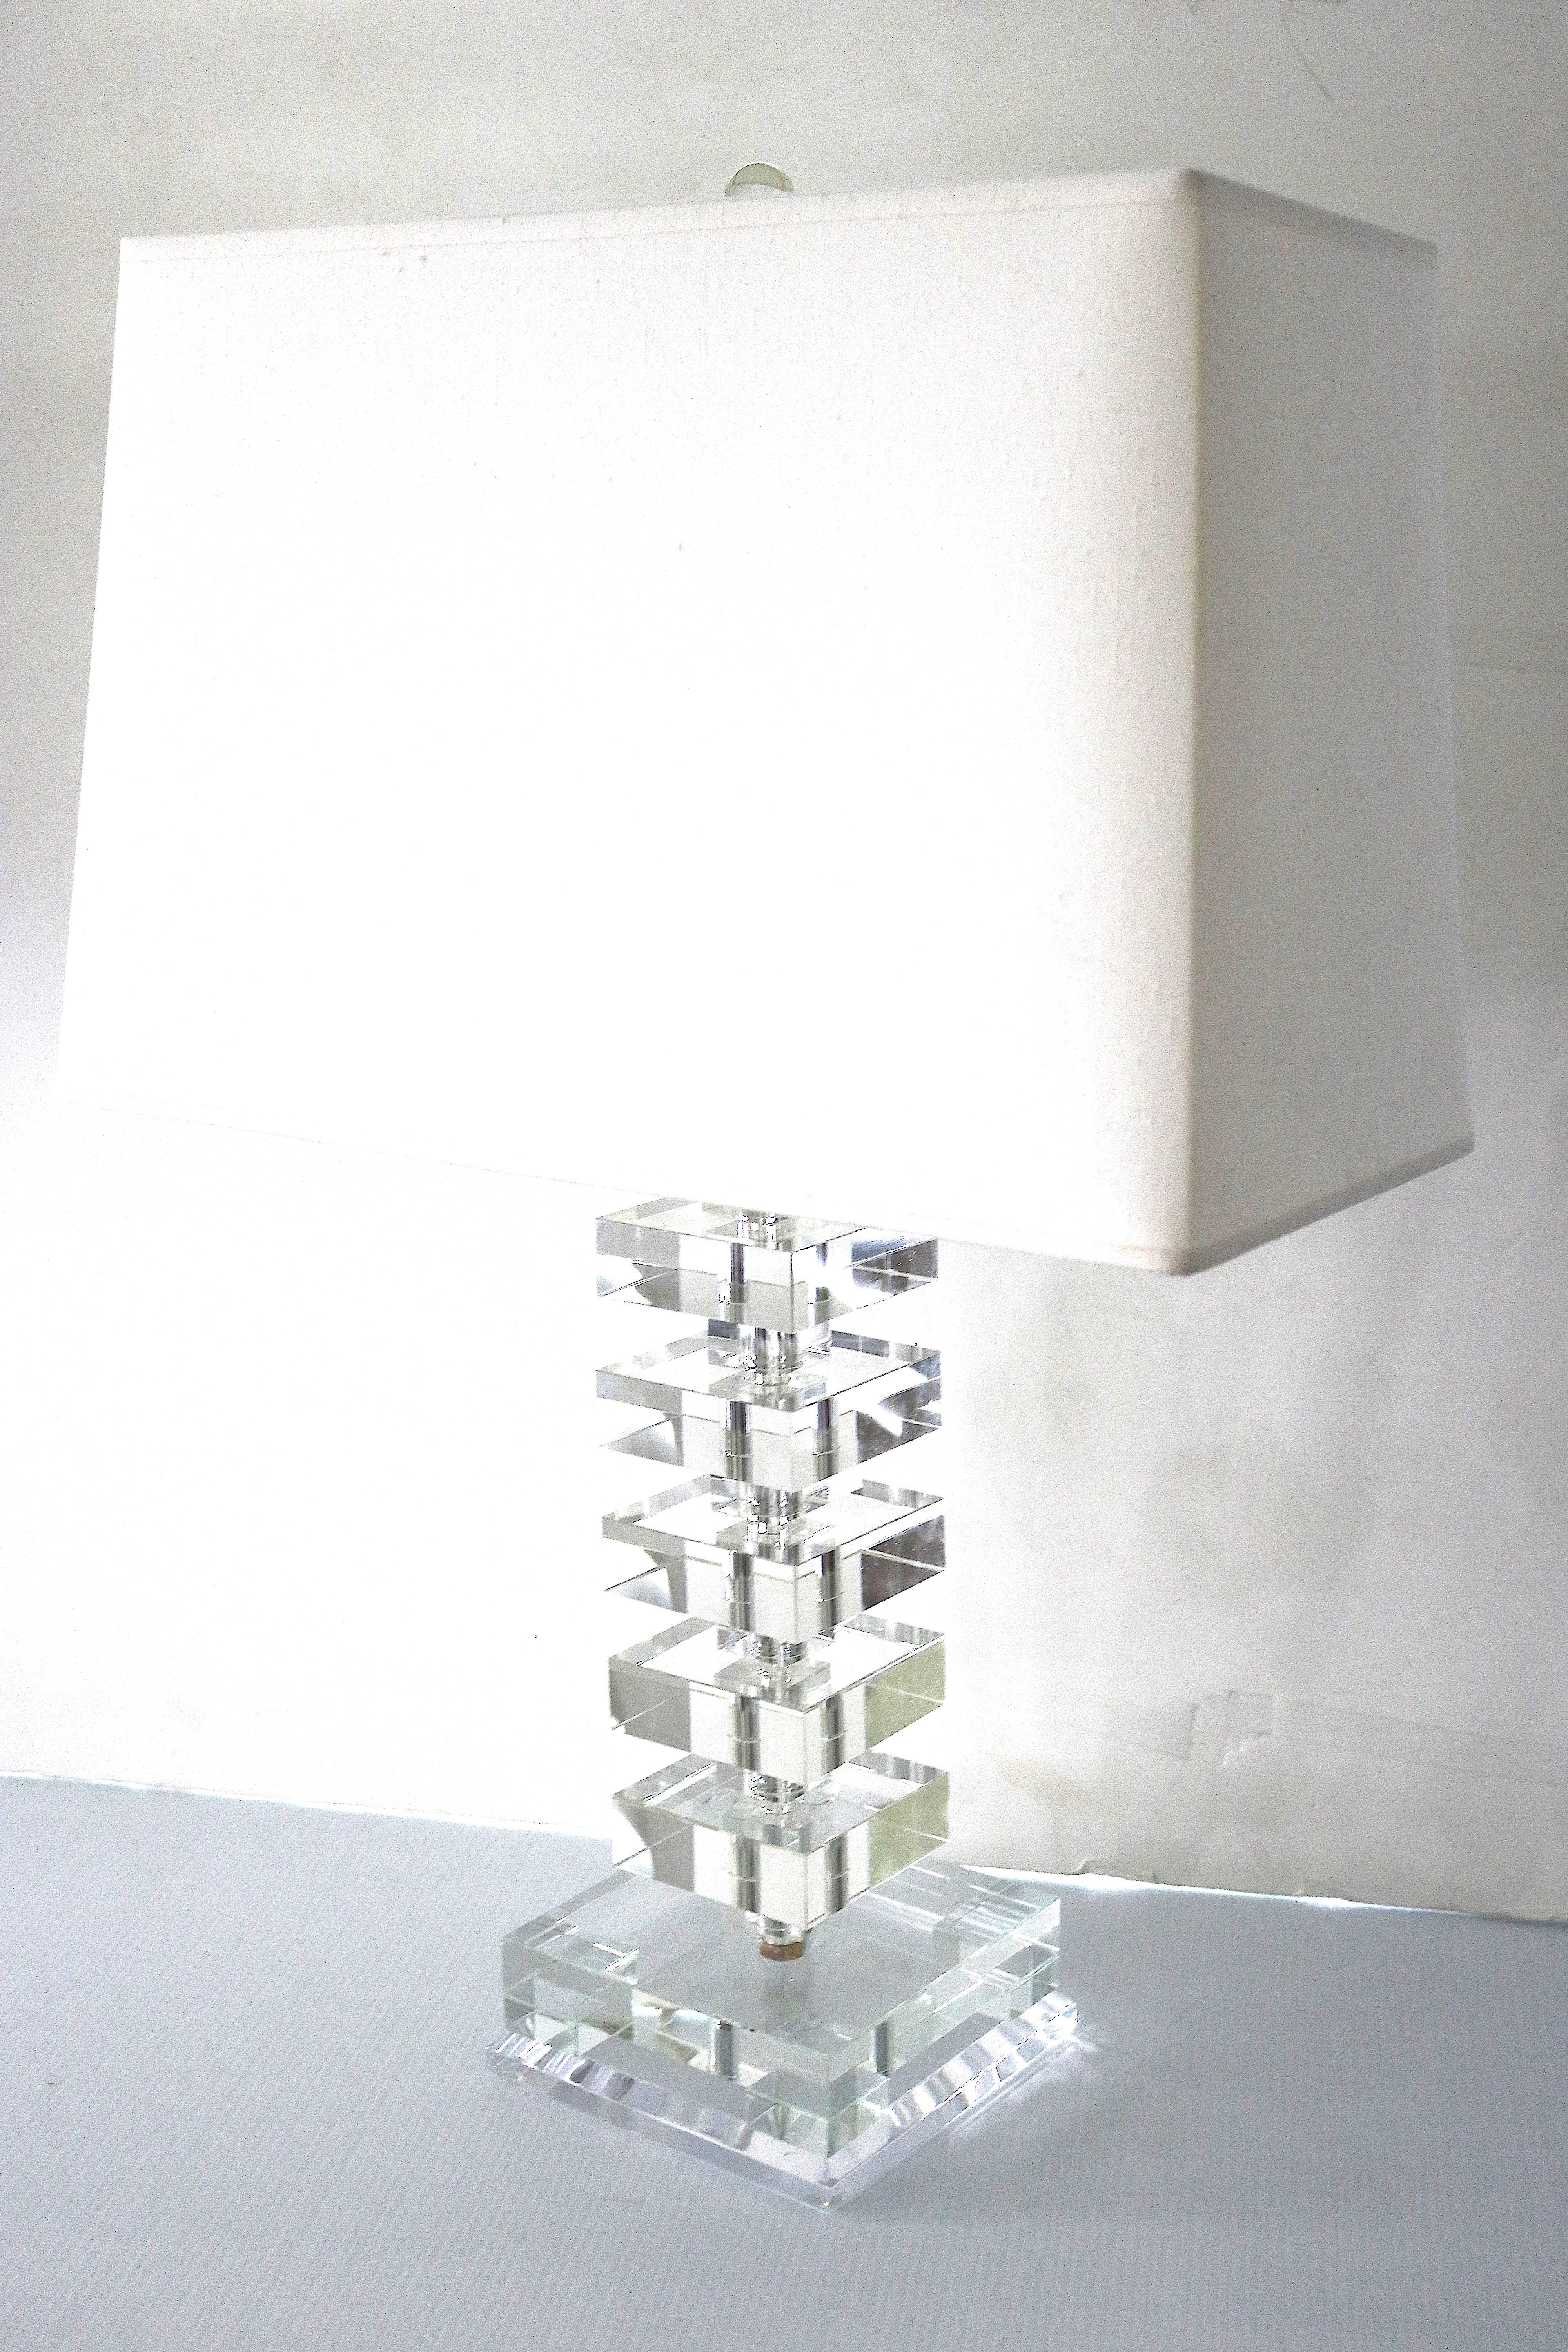 Two Sparkly crystal stacked block table lamps in stylish Orrefors graphic glam geometric forms!
Gershwin tunes, diamonds and sables. At home amidst the unapologetic decadence of the smoldering Jazz Age, this modern table lamp evokes an era when